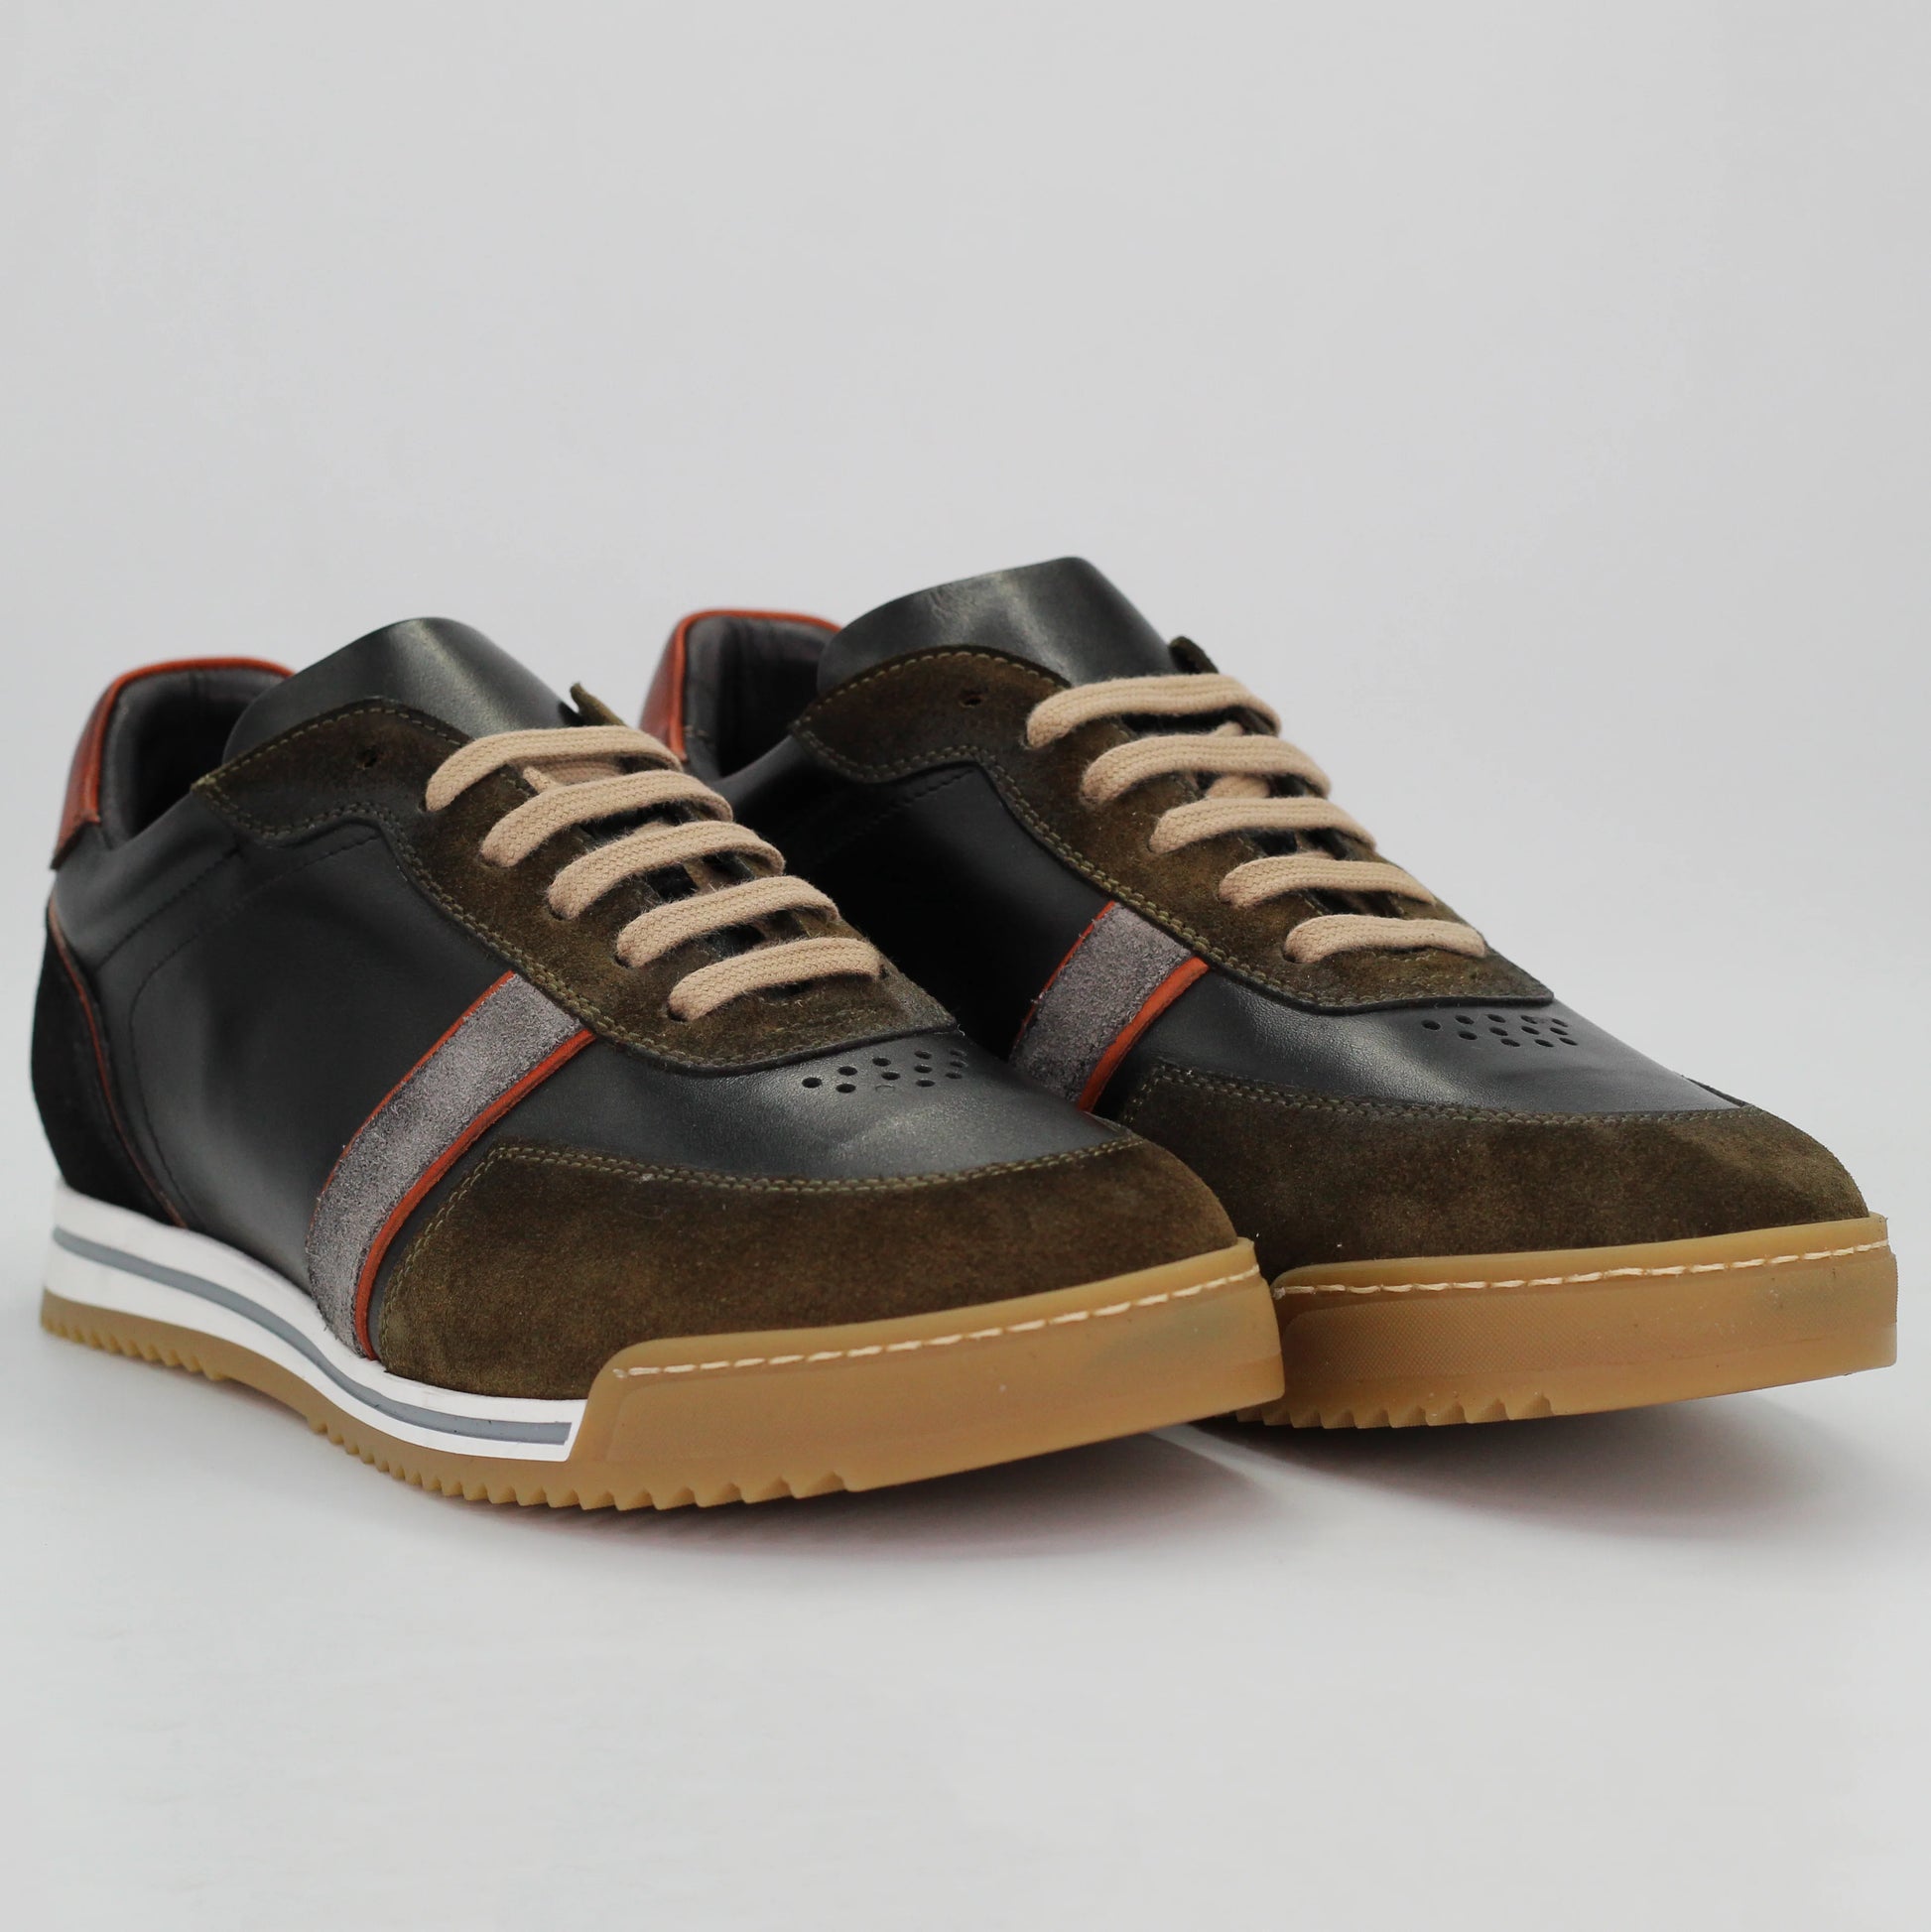 Shop Handmade Italian Leather sneaker in nero militare (BRU11860) or browse our range of hand-made Italian shoes in leather or suede in-store at Aliverti Cape Town, or shop online. We deliver in South Africa & offer multiple payment plans as well as accept multiple safe & secure payment methods.